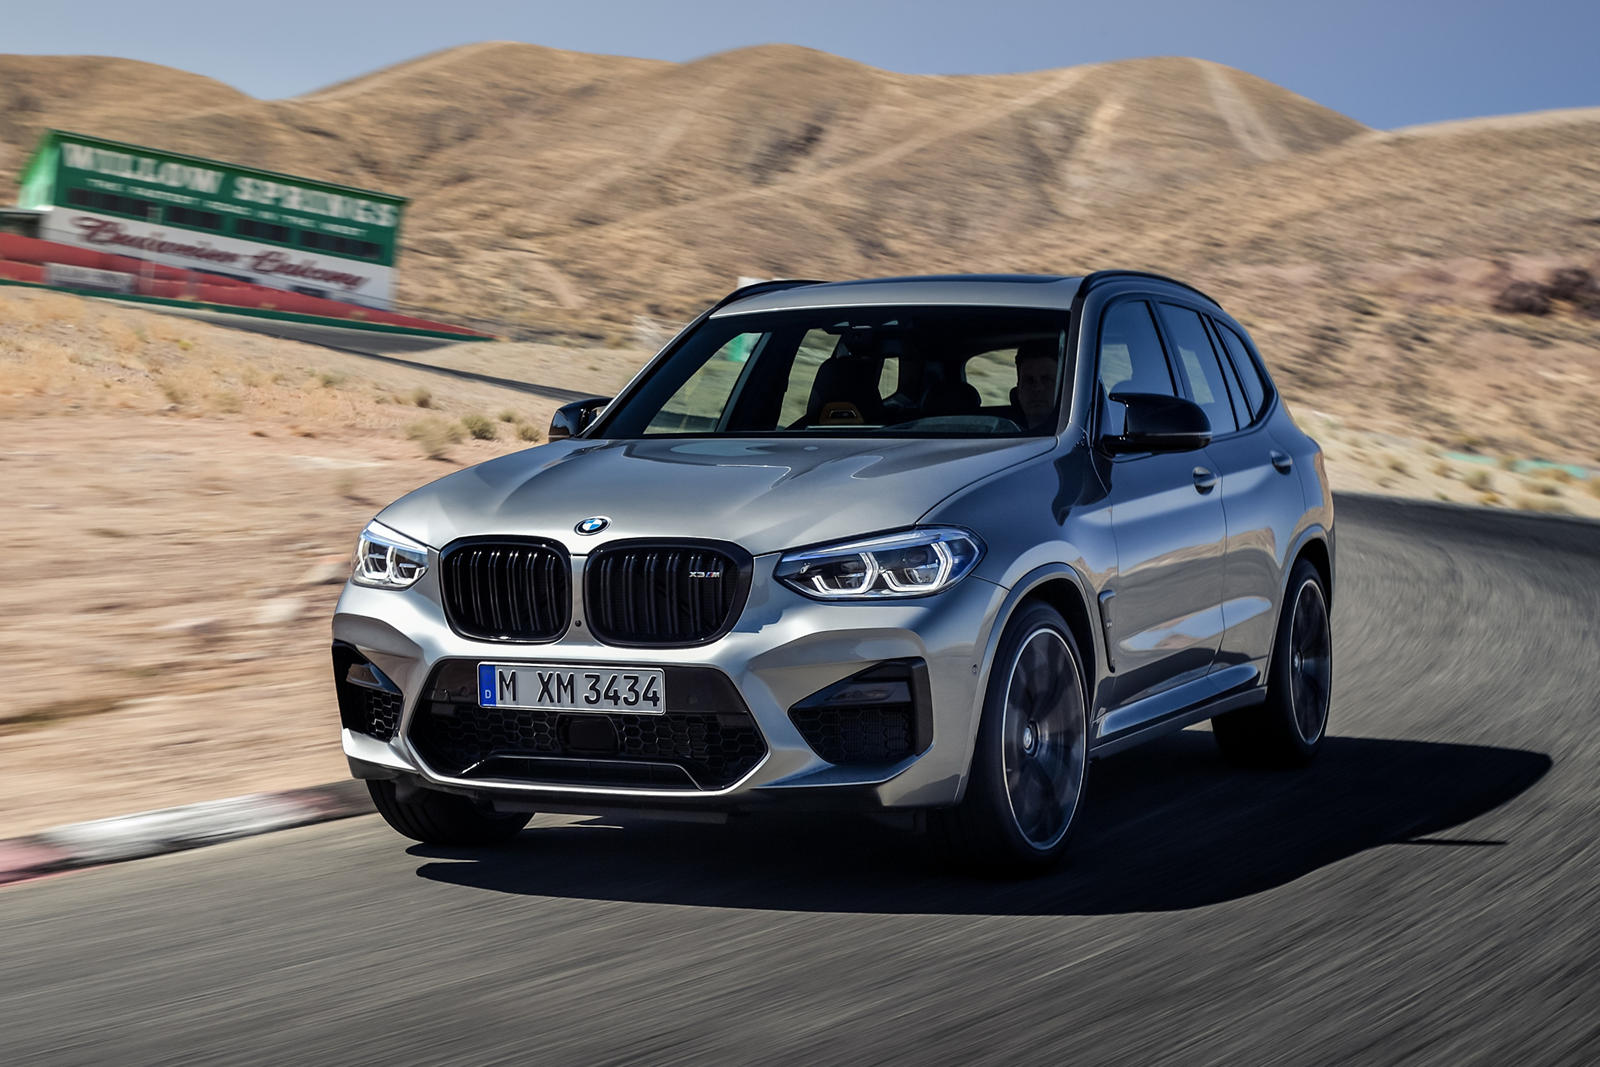 No longer just a brawny SUV: BMW X3 scores high on comfort and luxury